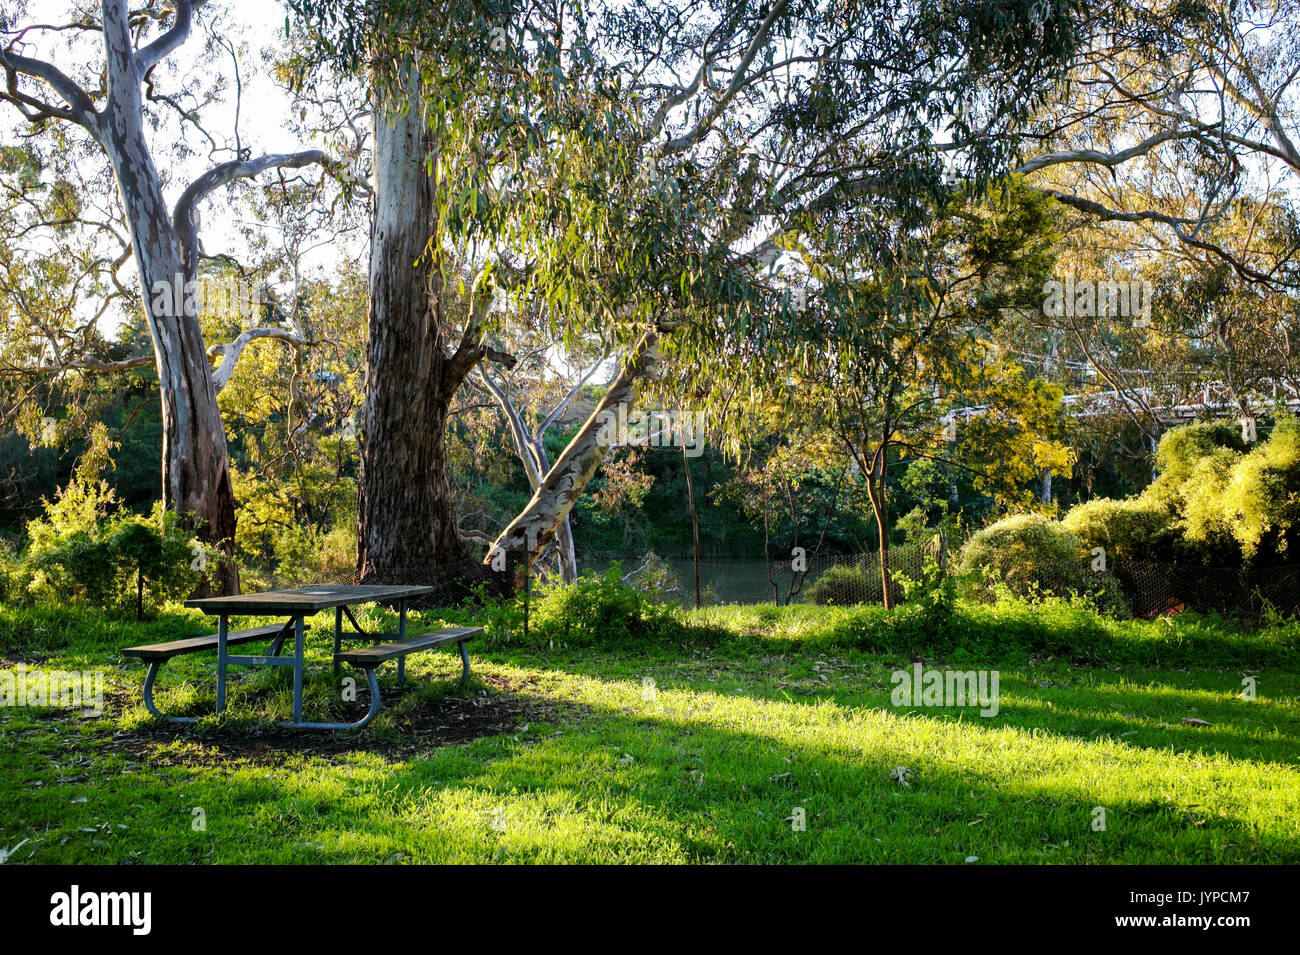 Picnic table in afternoon sunlight at Yarra Bend Park, Melbourne, Australia Stock Photo